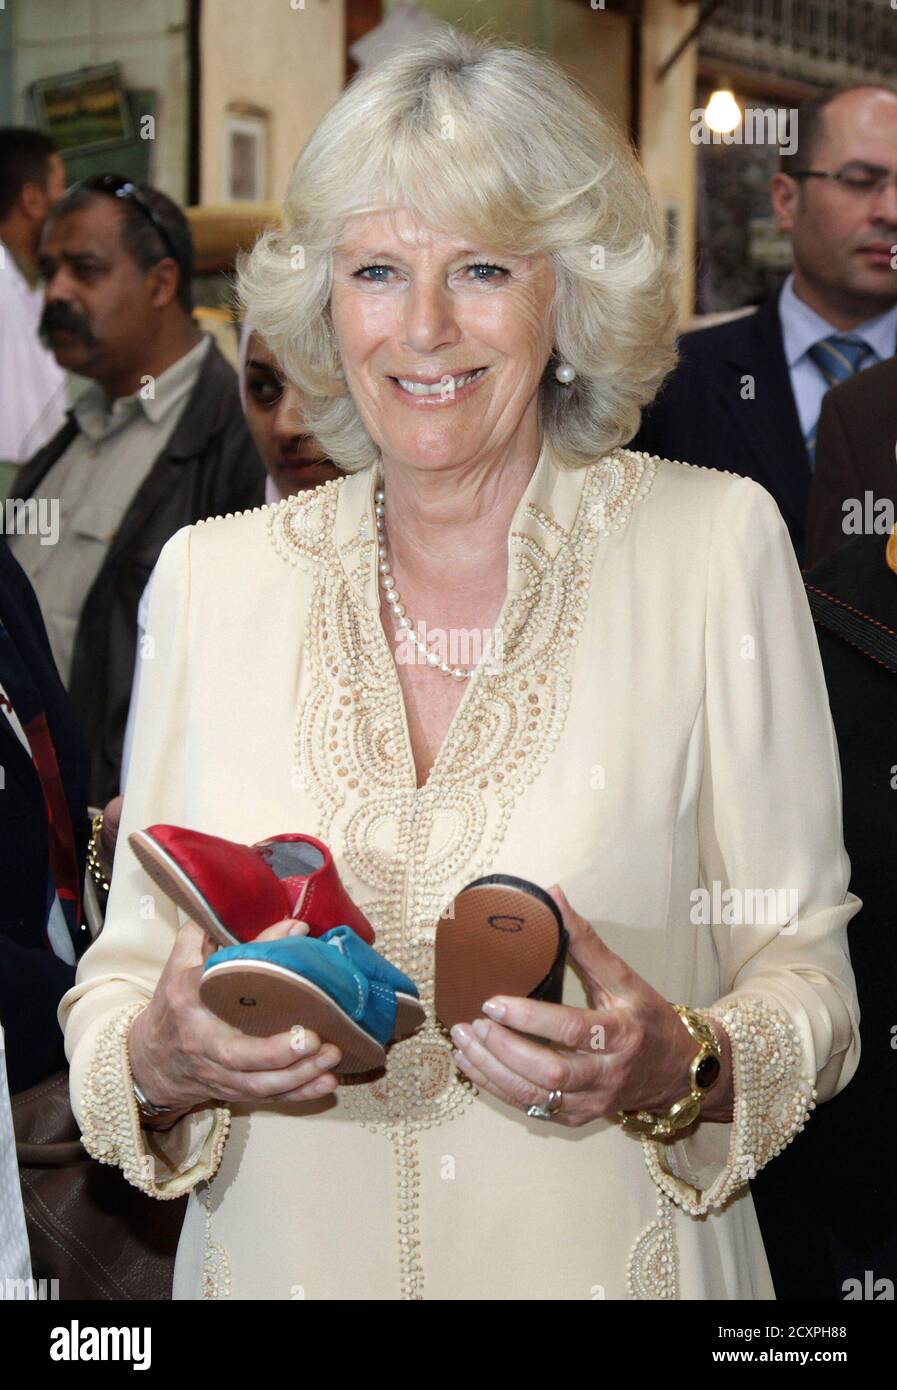 camilla-duchess-of-cornwall-visits-a-traditional-shoe-shop-in-the-medina-of-fez-morocco-april-6-2011-camilla-duchess-of-cornwall-and-her-husband-prince-charles-are-on-the-third-day-of-a-three-day-trip-to-morocco-as-part-of-a-tour-to-portugal-spain-and-morroco-the-prince-was-due-to-visit-an-area-of-the-sahara-desert-today-but-the-trip-was-cancelled-due-to-high-winds-reuterschris-jacksonpool-morocco-tags-royals-entertainment-travel-2CXPH88.jpg